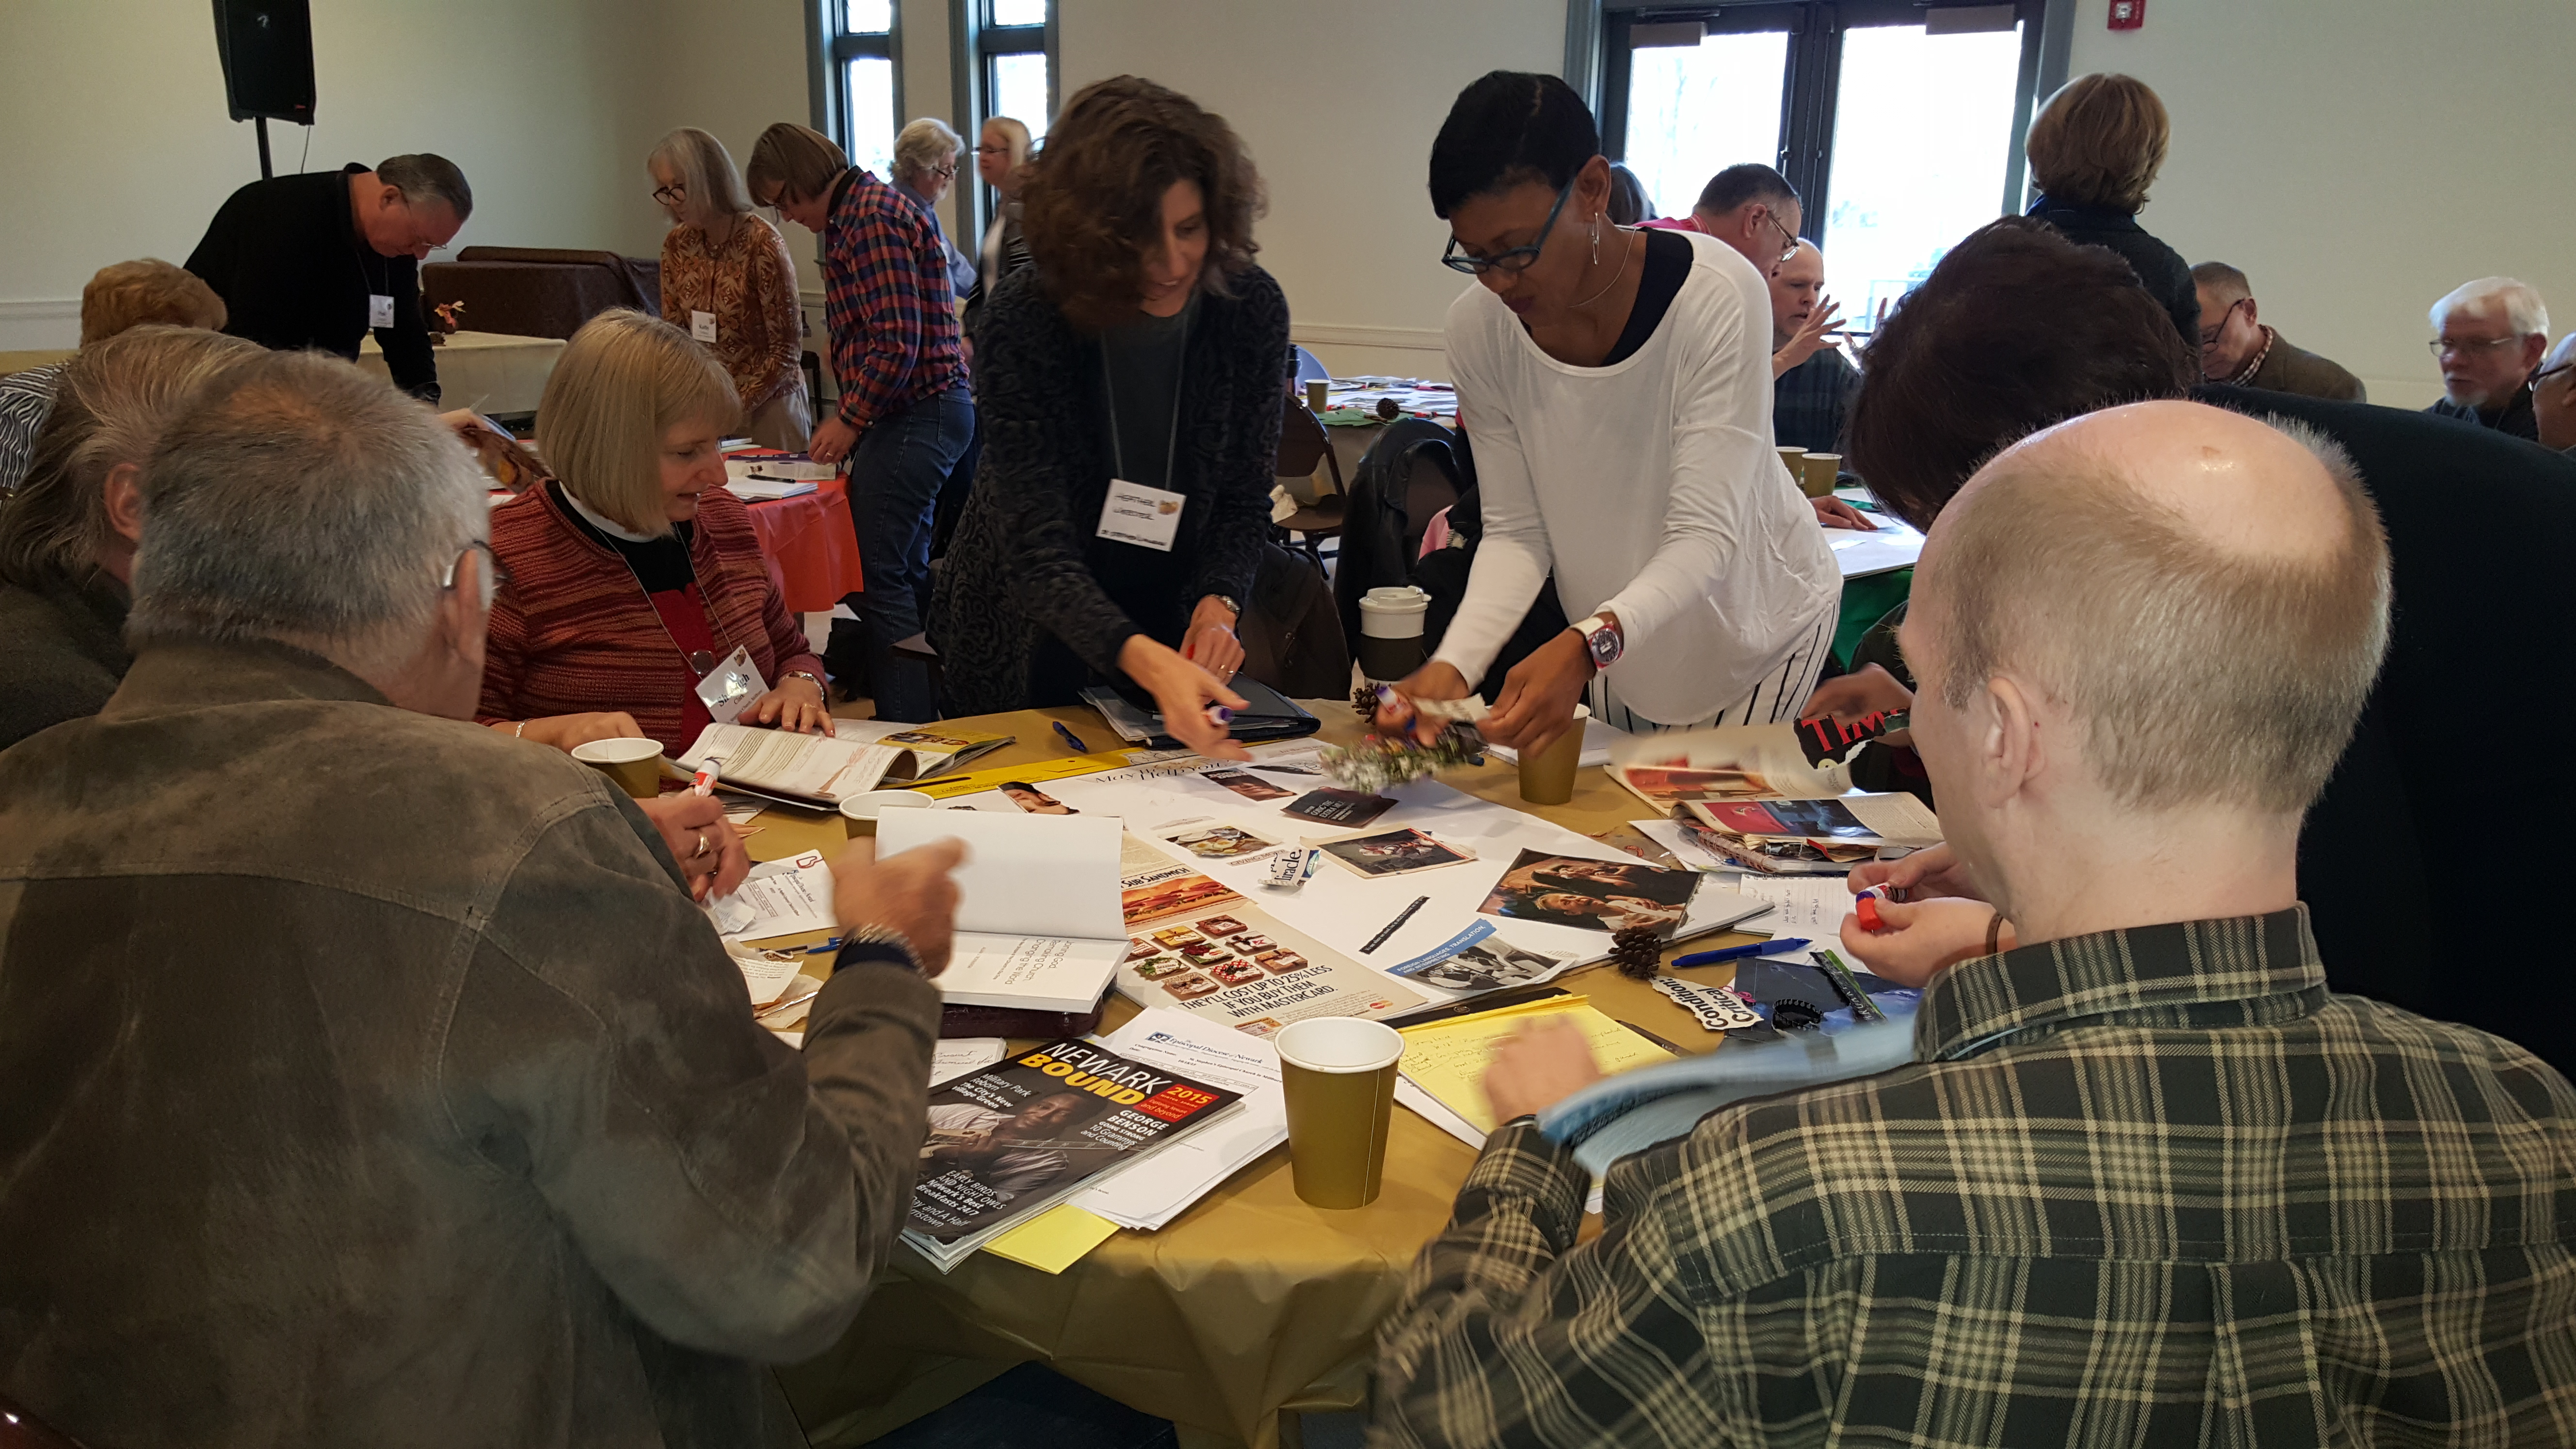 Members of congregations involved in the "Going Local" process